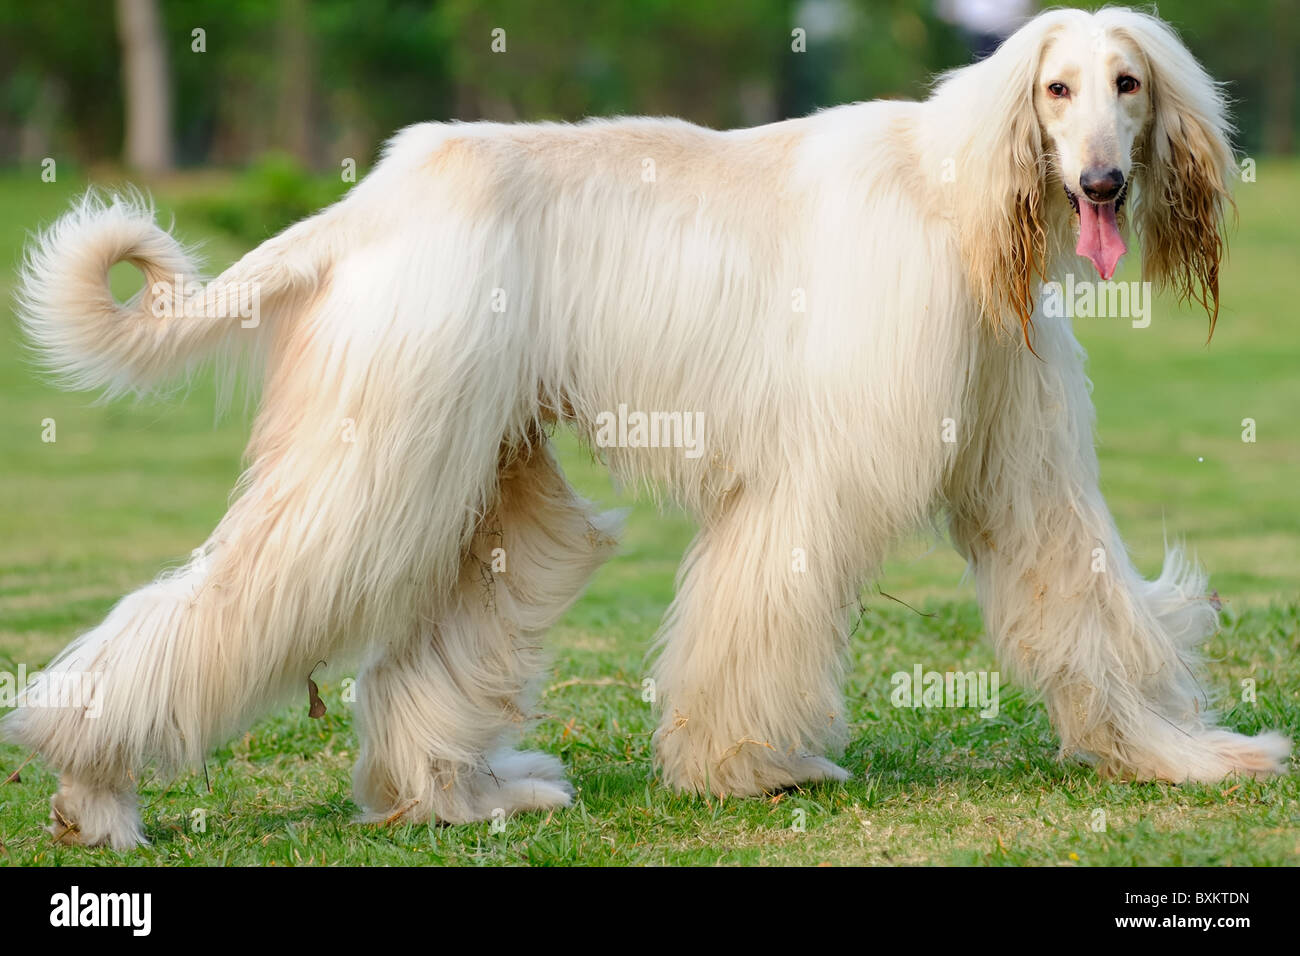 An afghan hound dog walking on the lawn Stock Photo